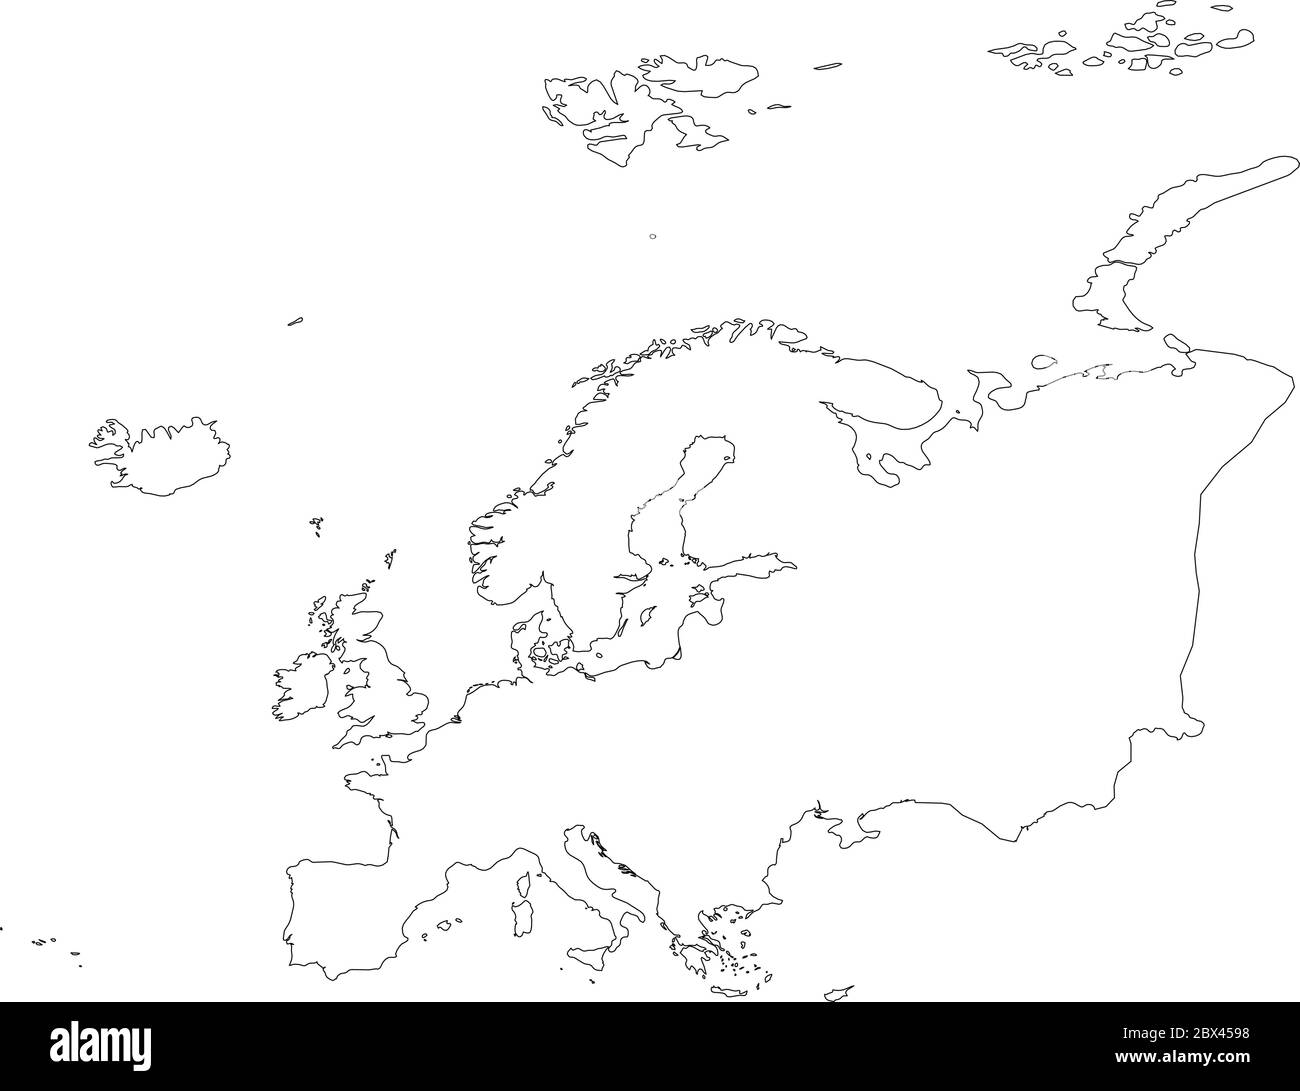 Europe thin black outline map. Contour map of continent. Simple flat vector illustration. Stock Vector